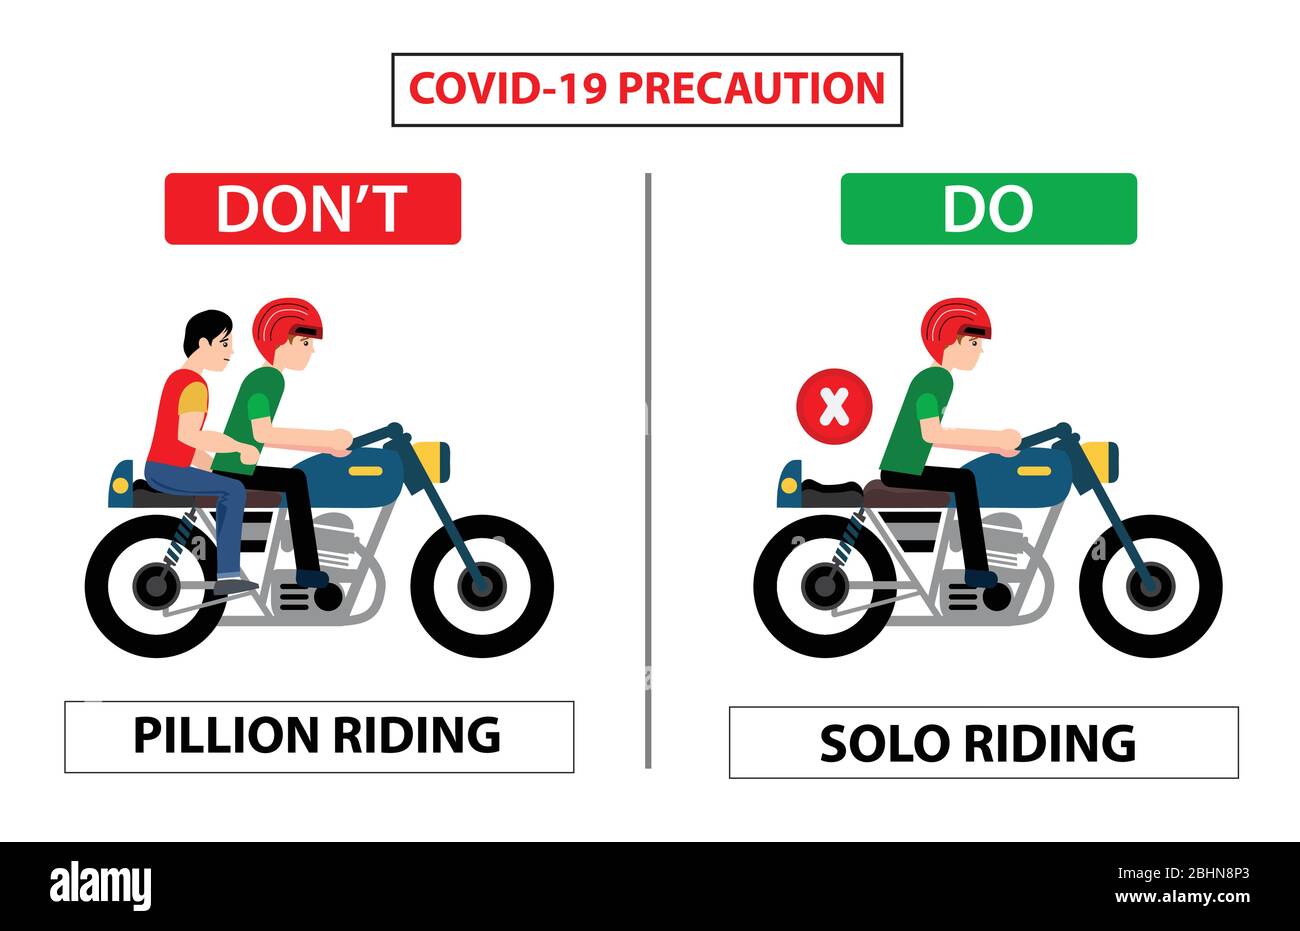 Do and don't poster for covid 19 corona virus. Safety instruction for office employees and staff. Vector illustration of bike driving with pillion rid Stock Vector